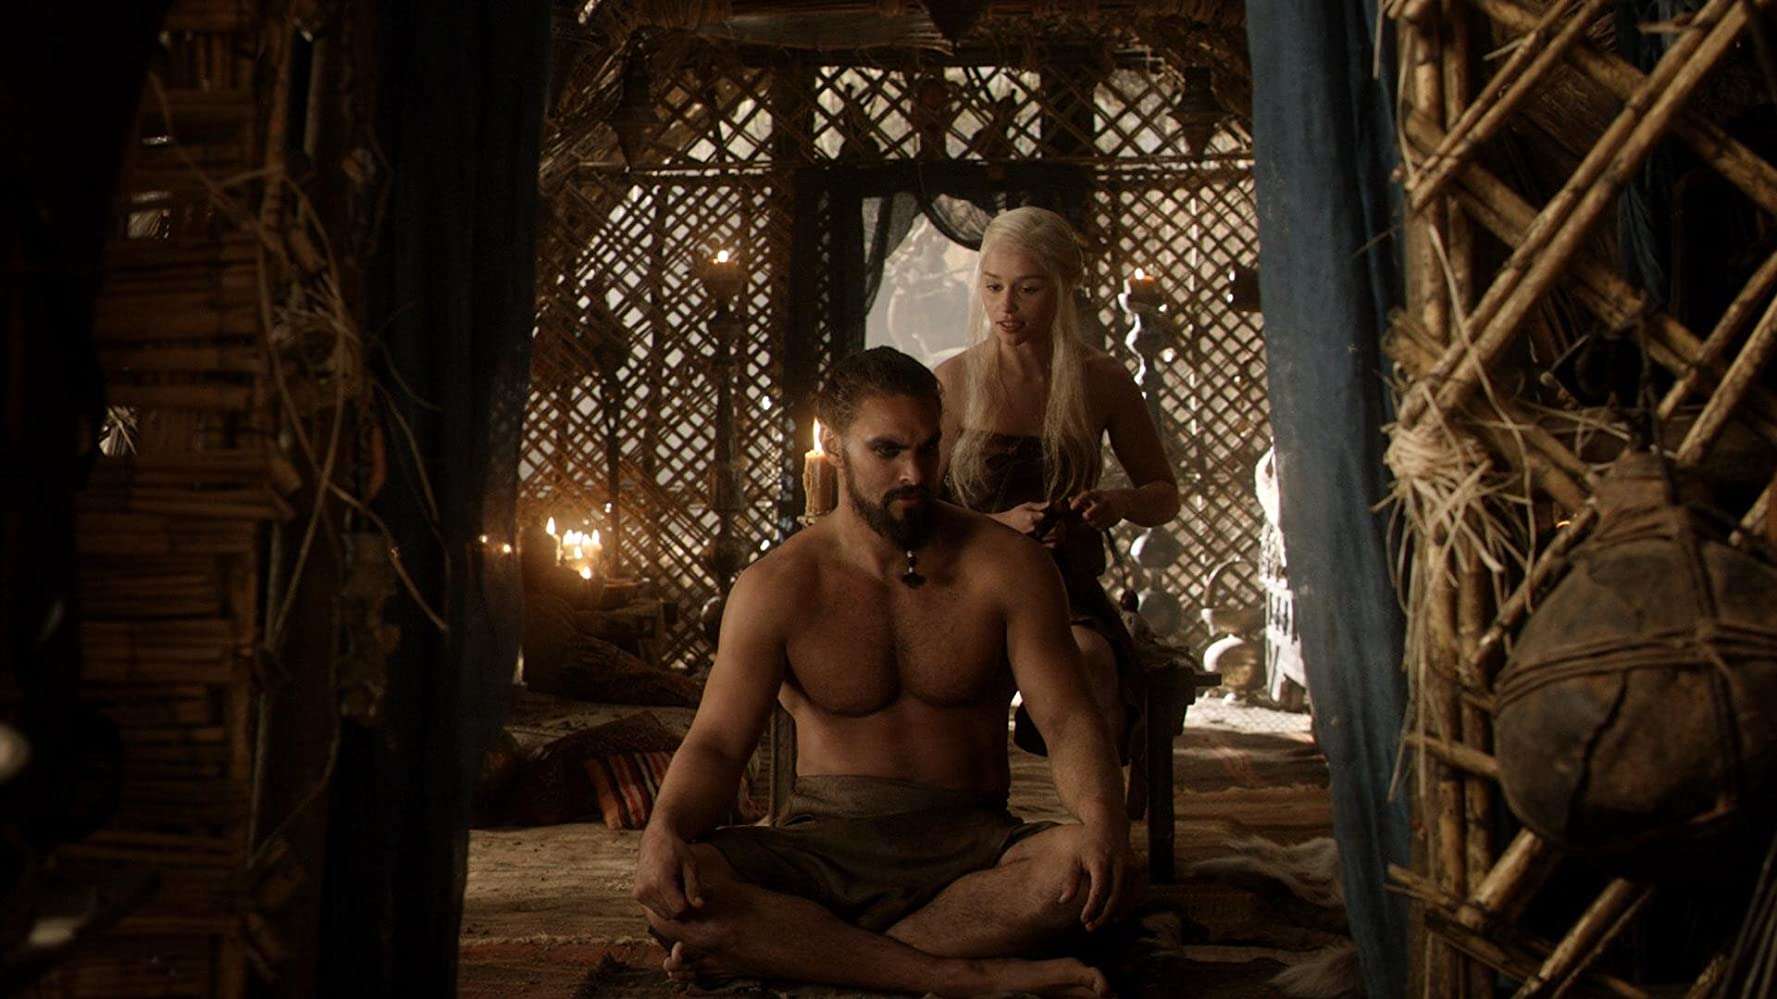 ame of thrones nude scenes